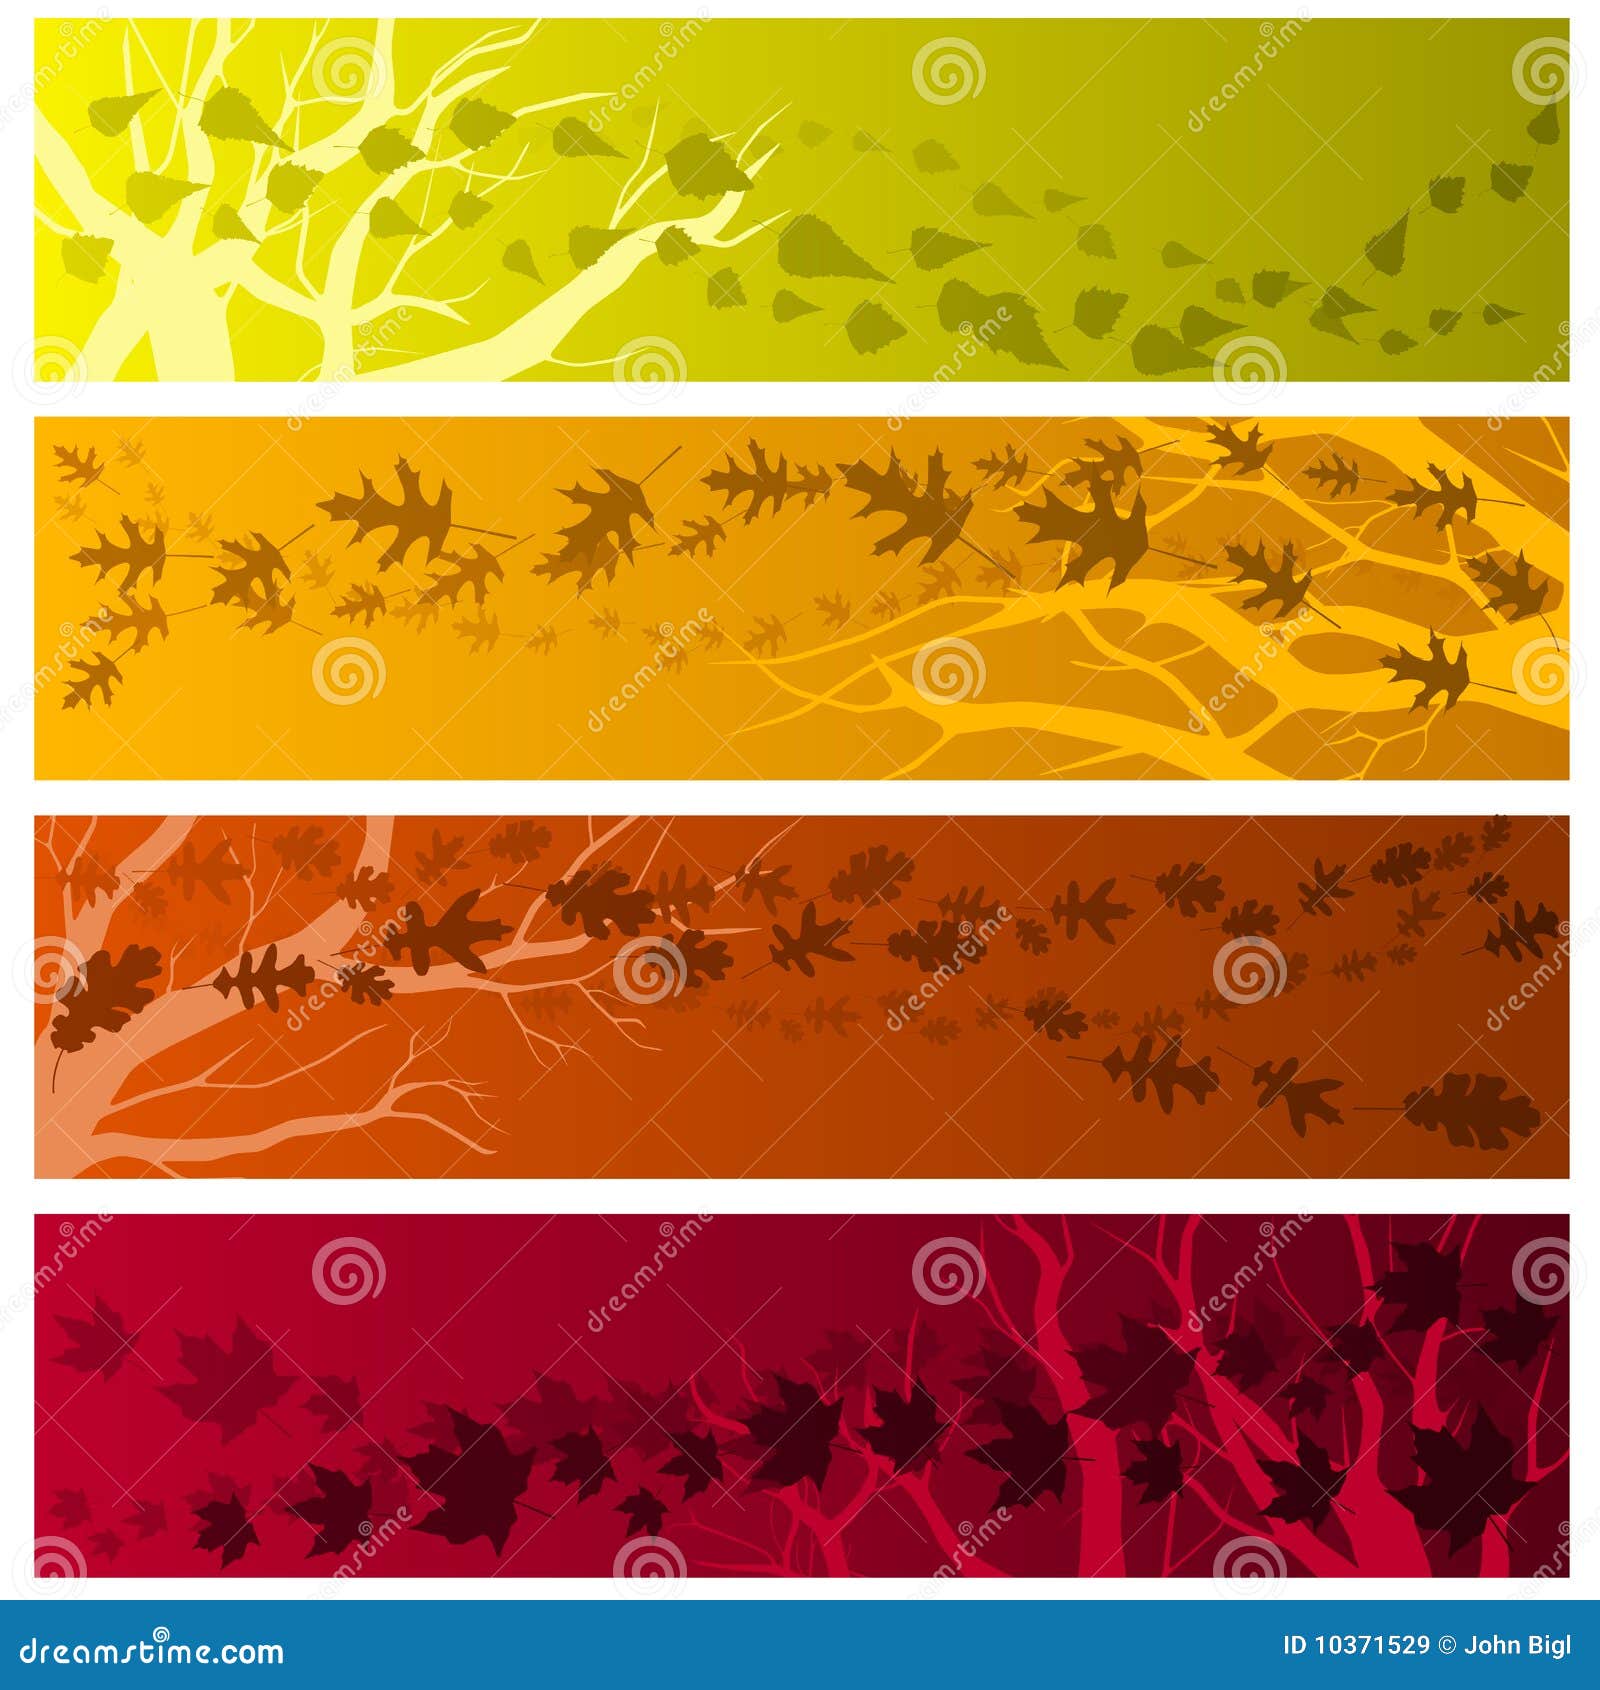 Autumn banners horizontal. Autumn banner backgrounds with vector leaves and branches - horizontal